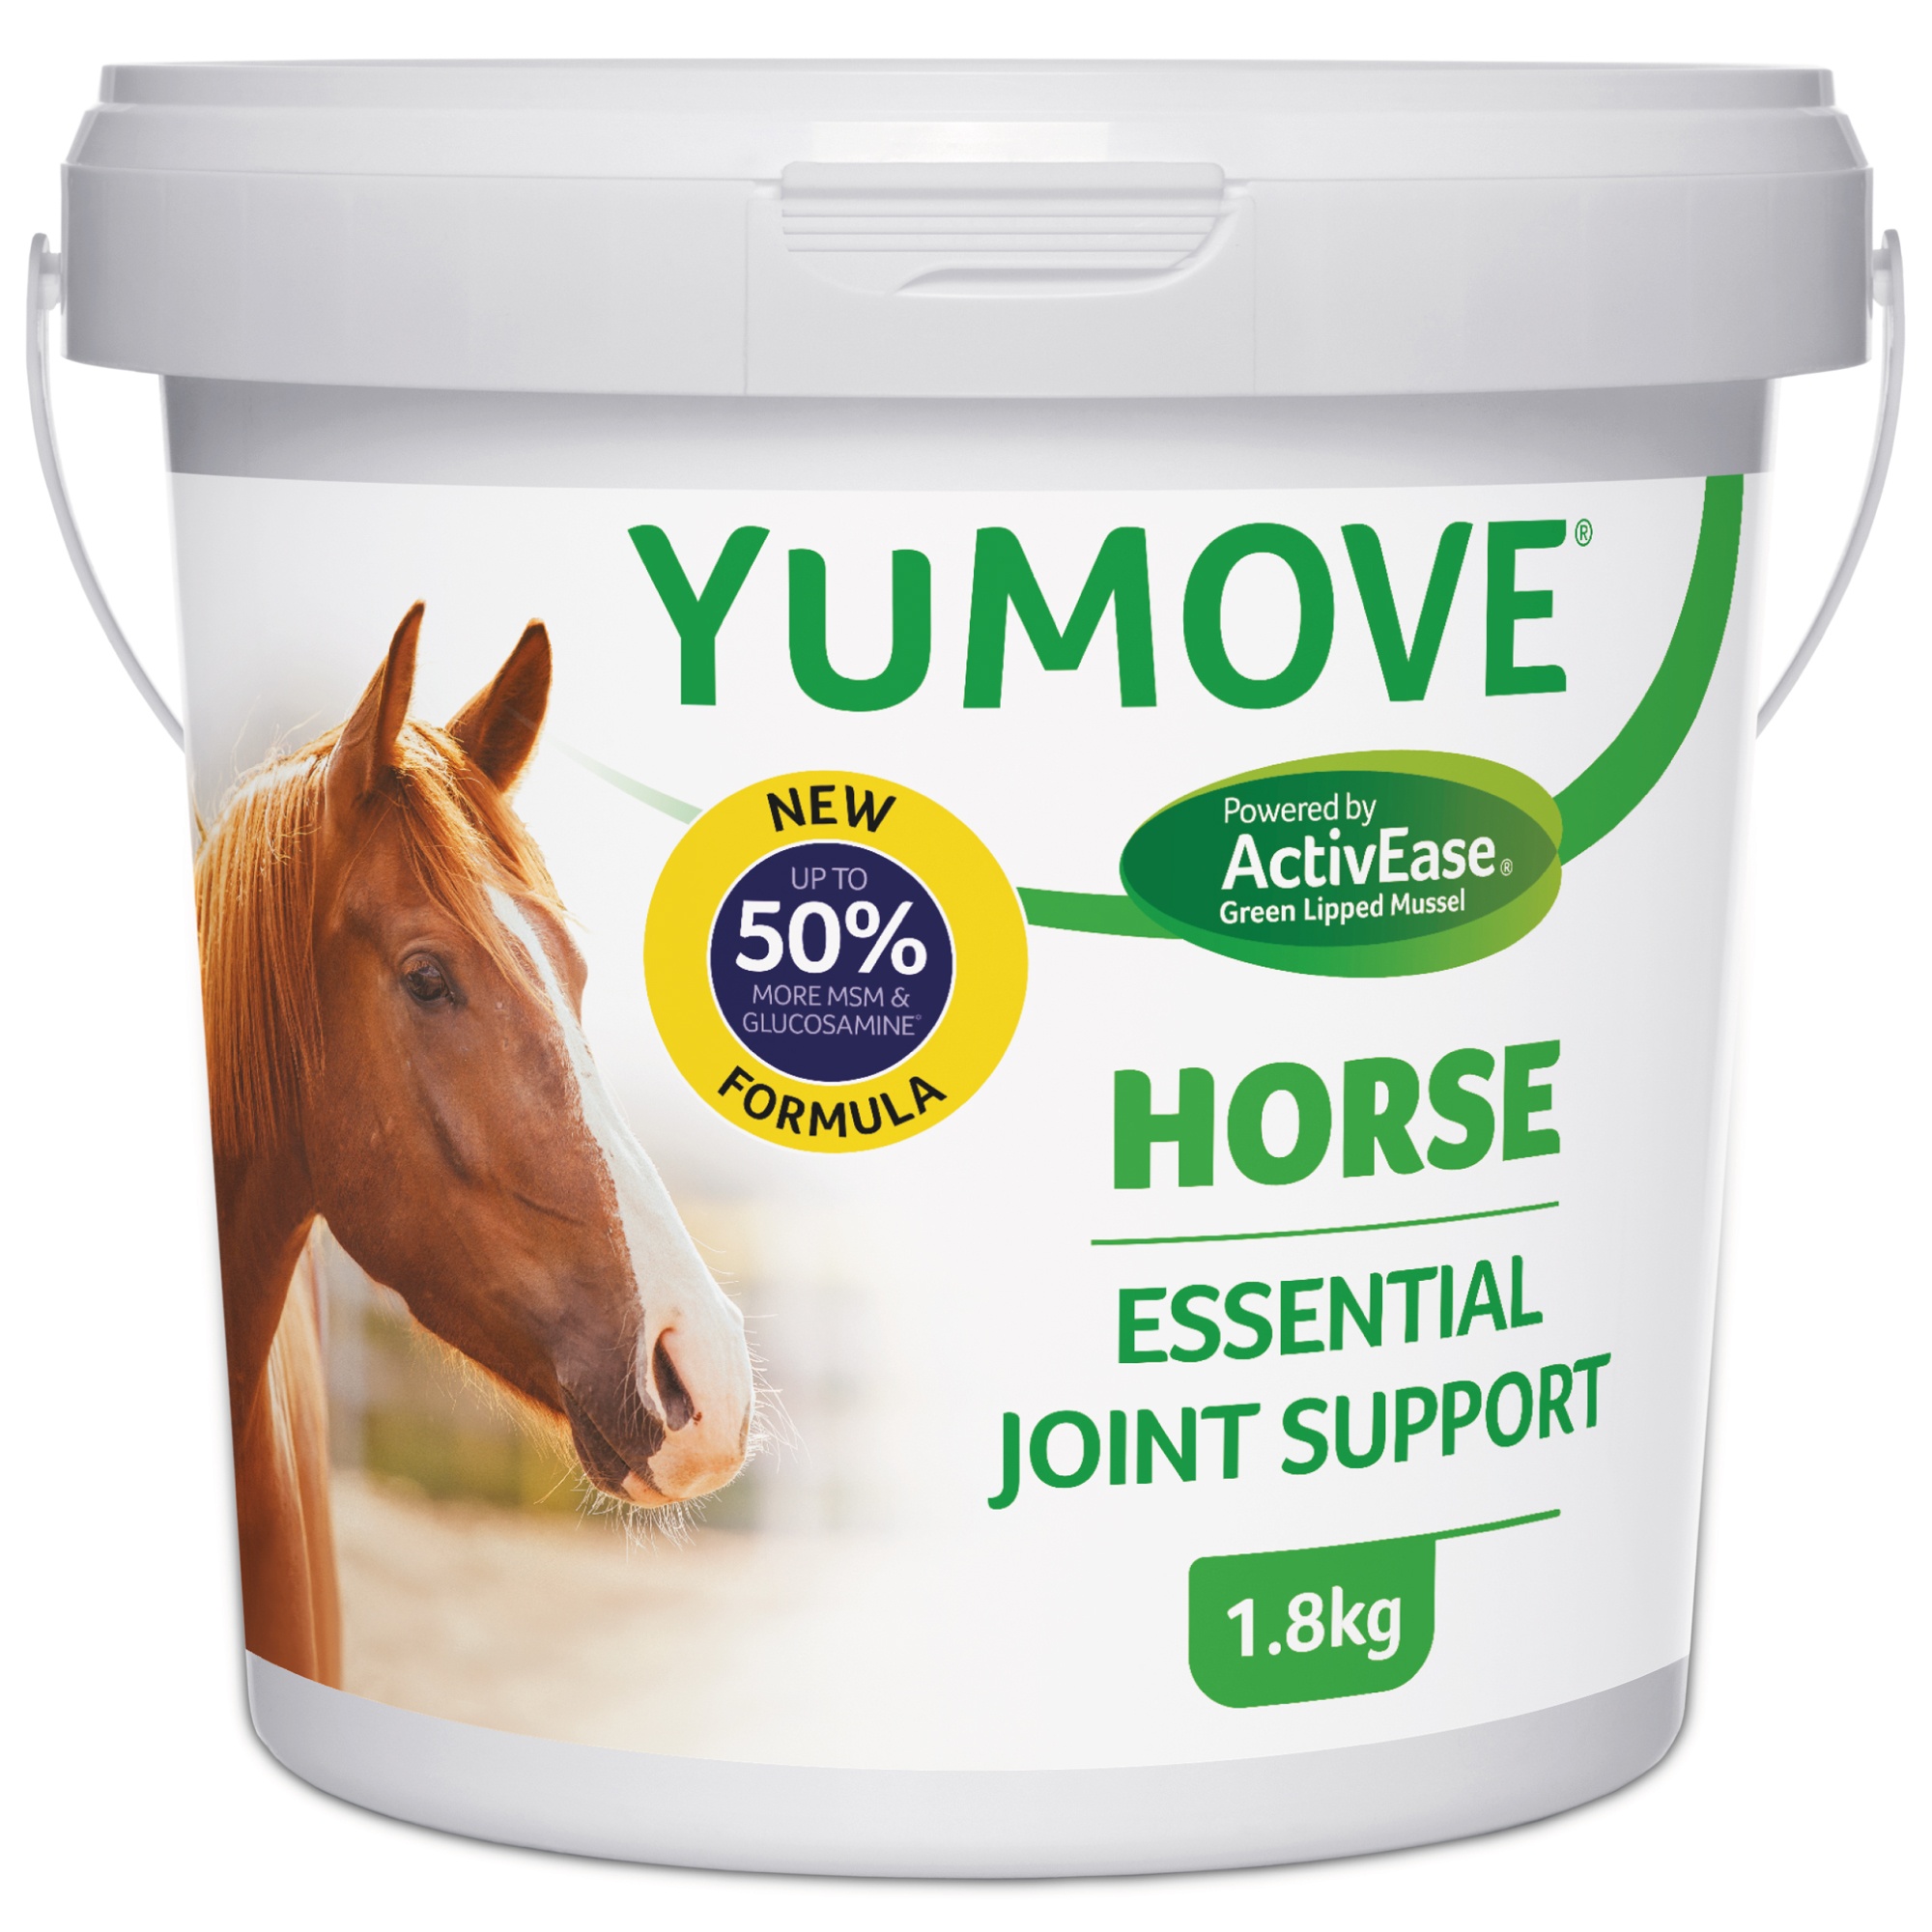 YuMOVE 🐴 Horse Essential Joint Supplement VioVet.co.uk